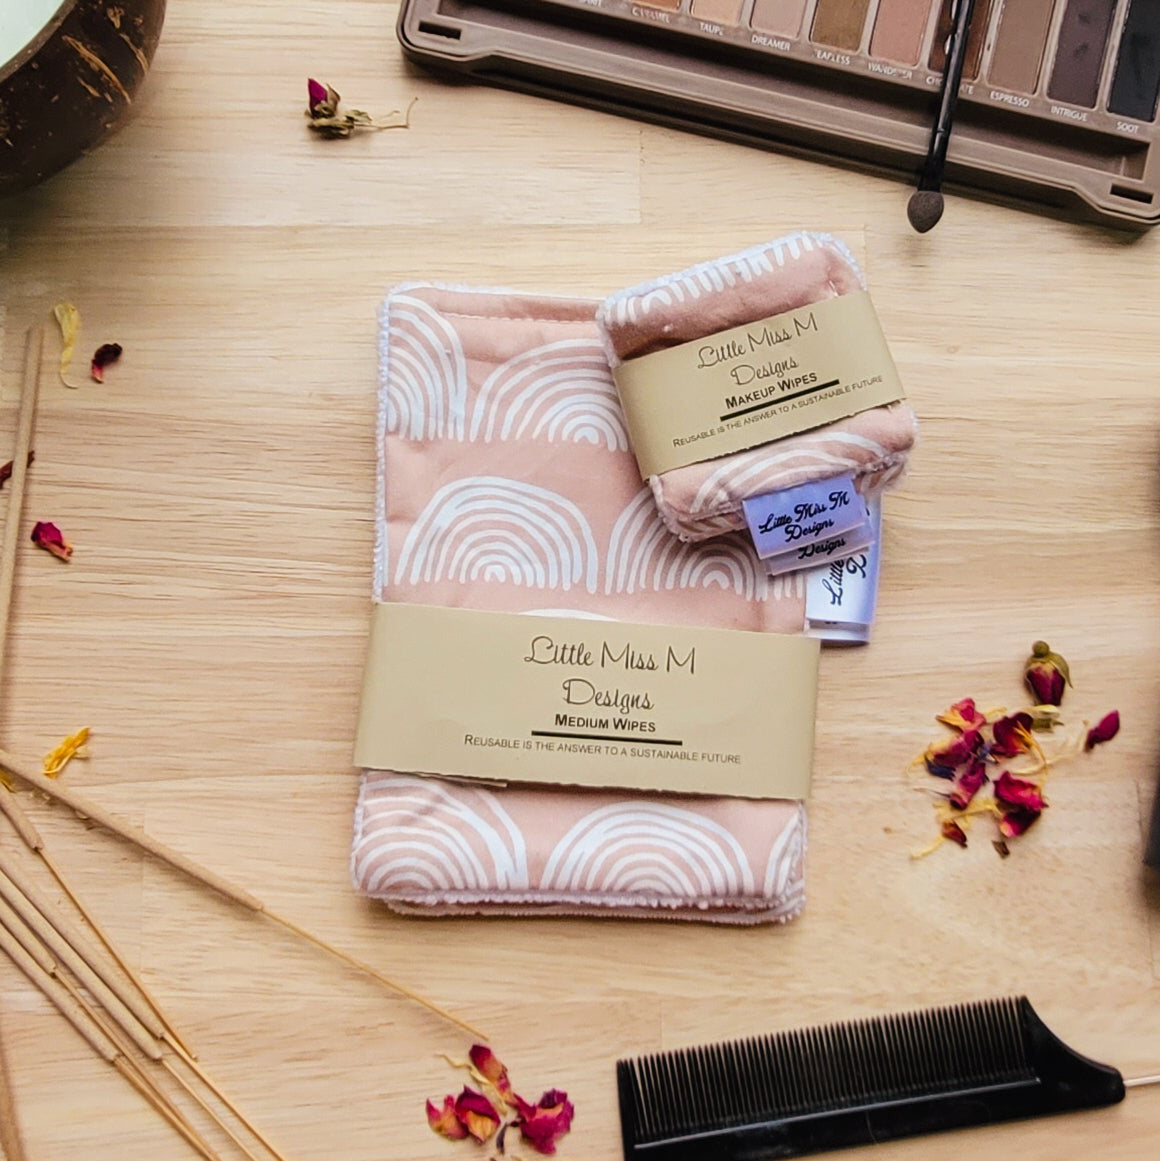 Omeo Makeup Wipes